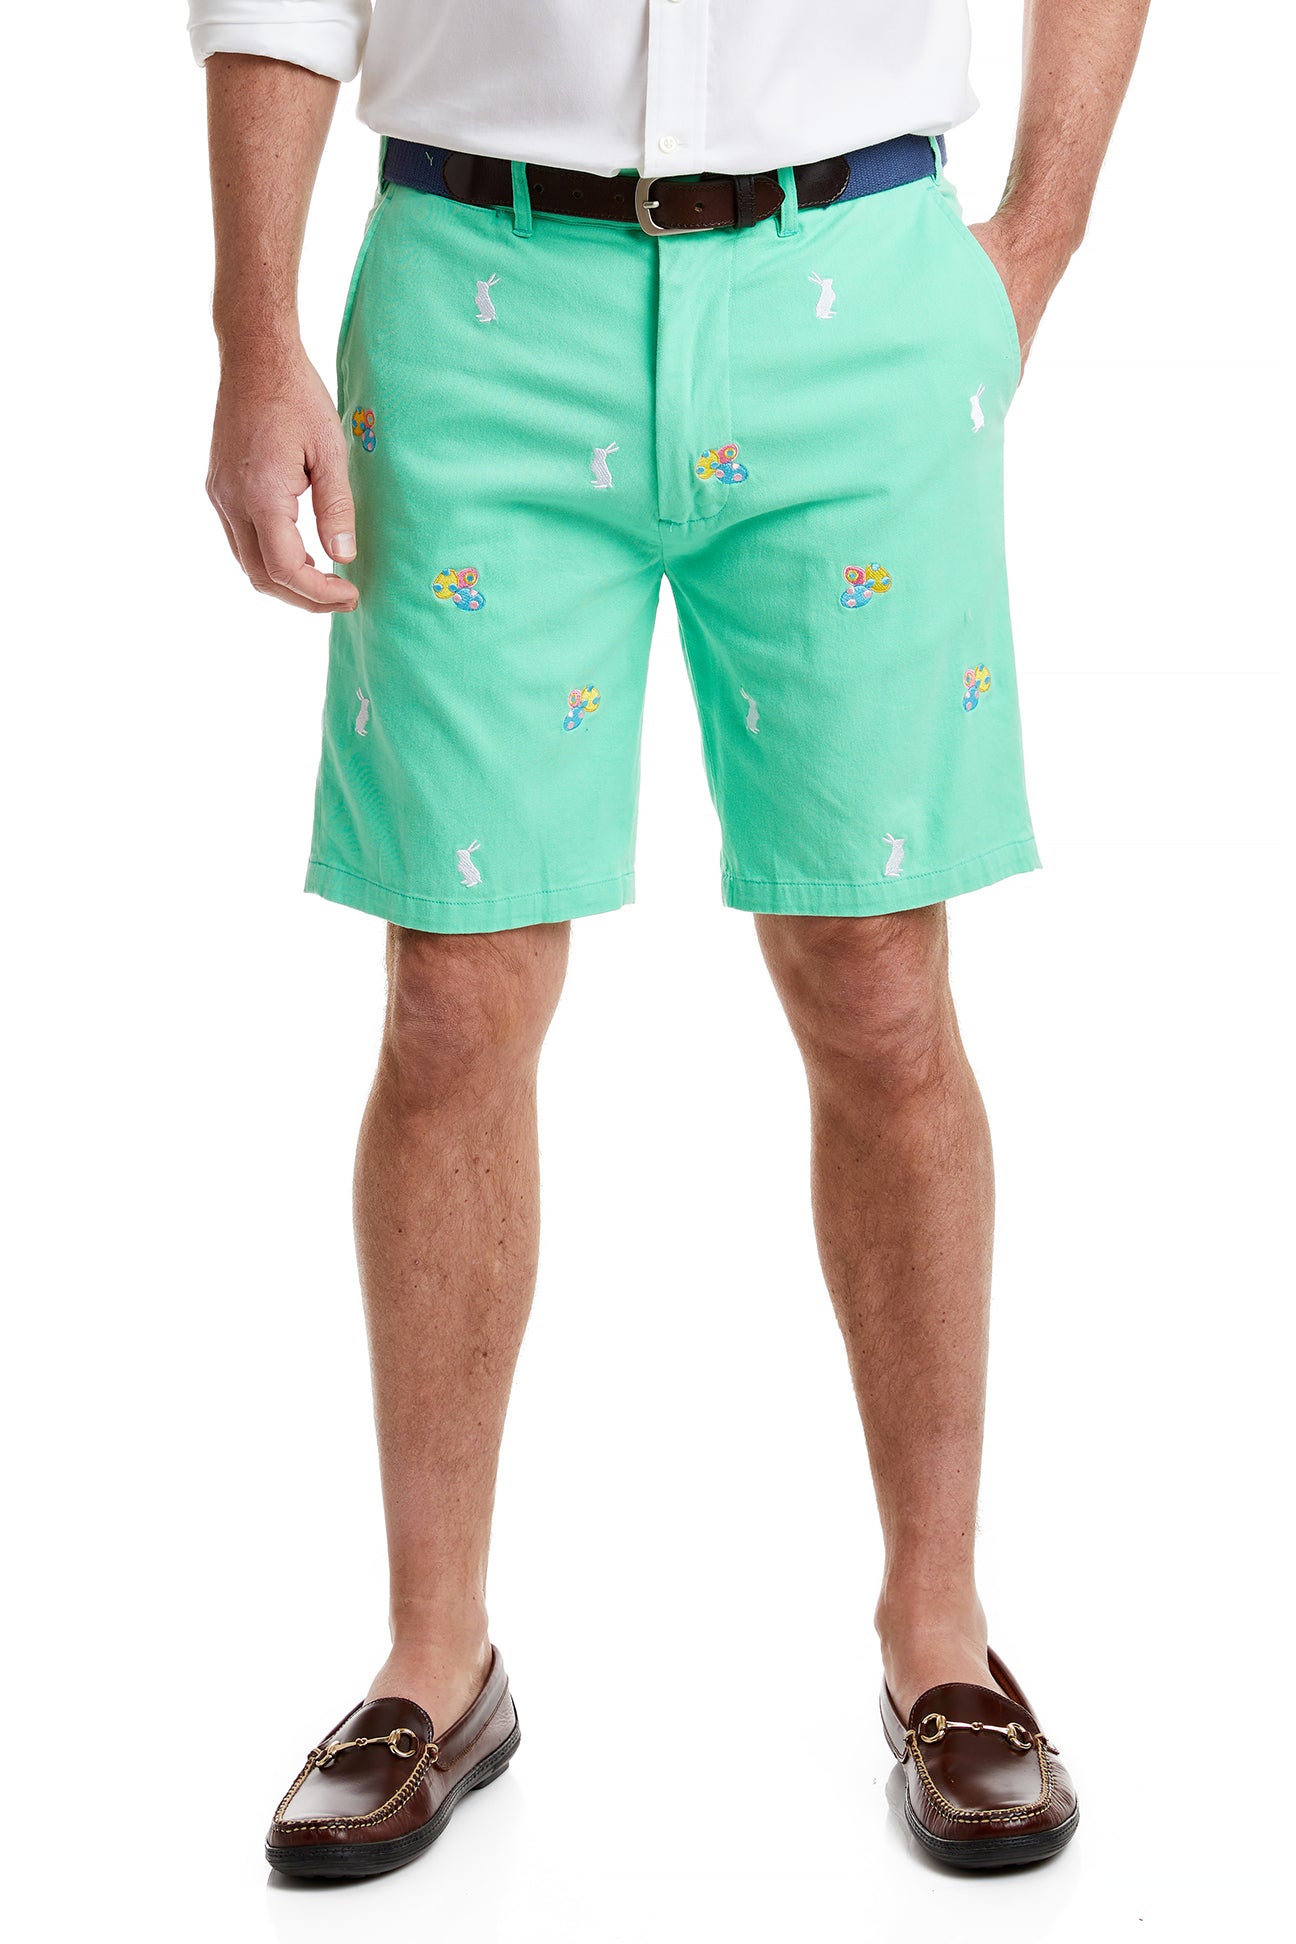 Cisco Short Spring Green with Easter Egg & Bunny MENS EMBROIDERED SHORTS Castaway Nantucket Island